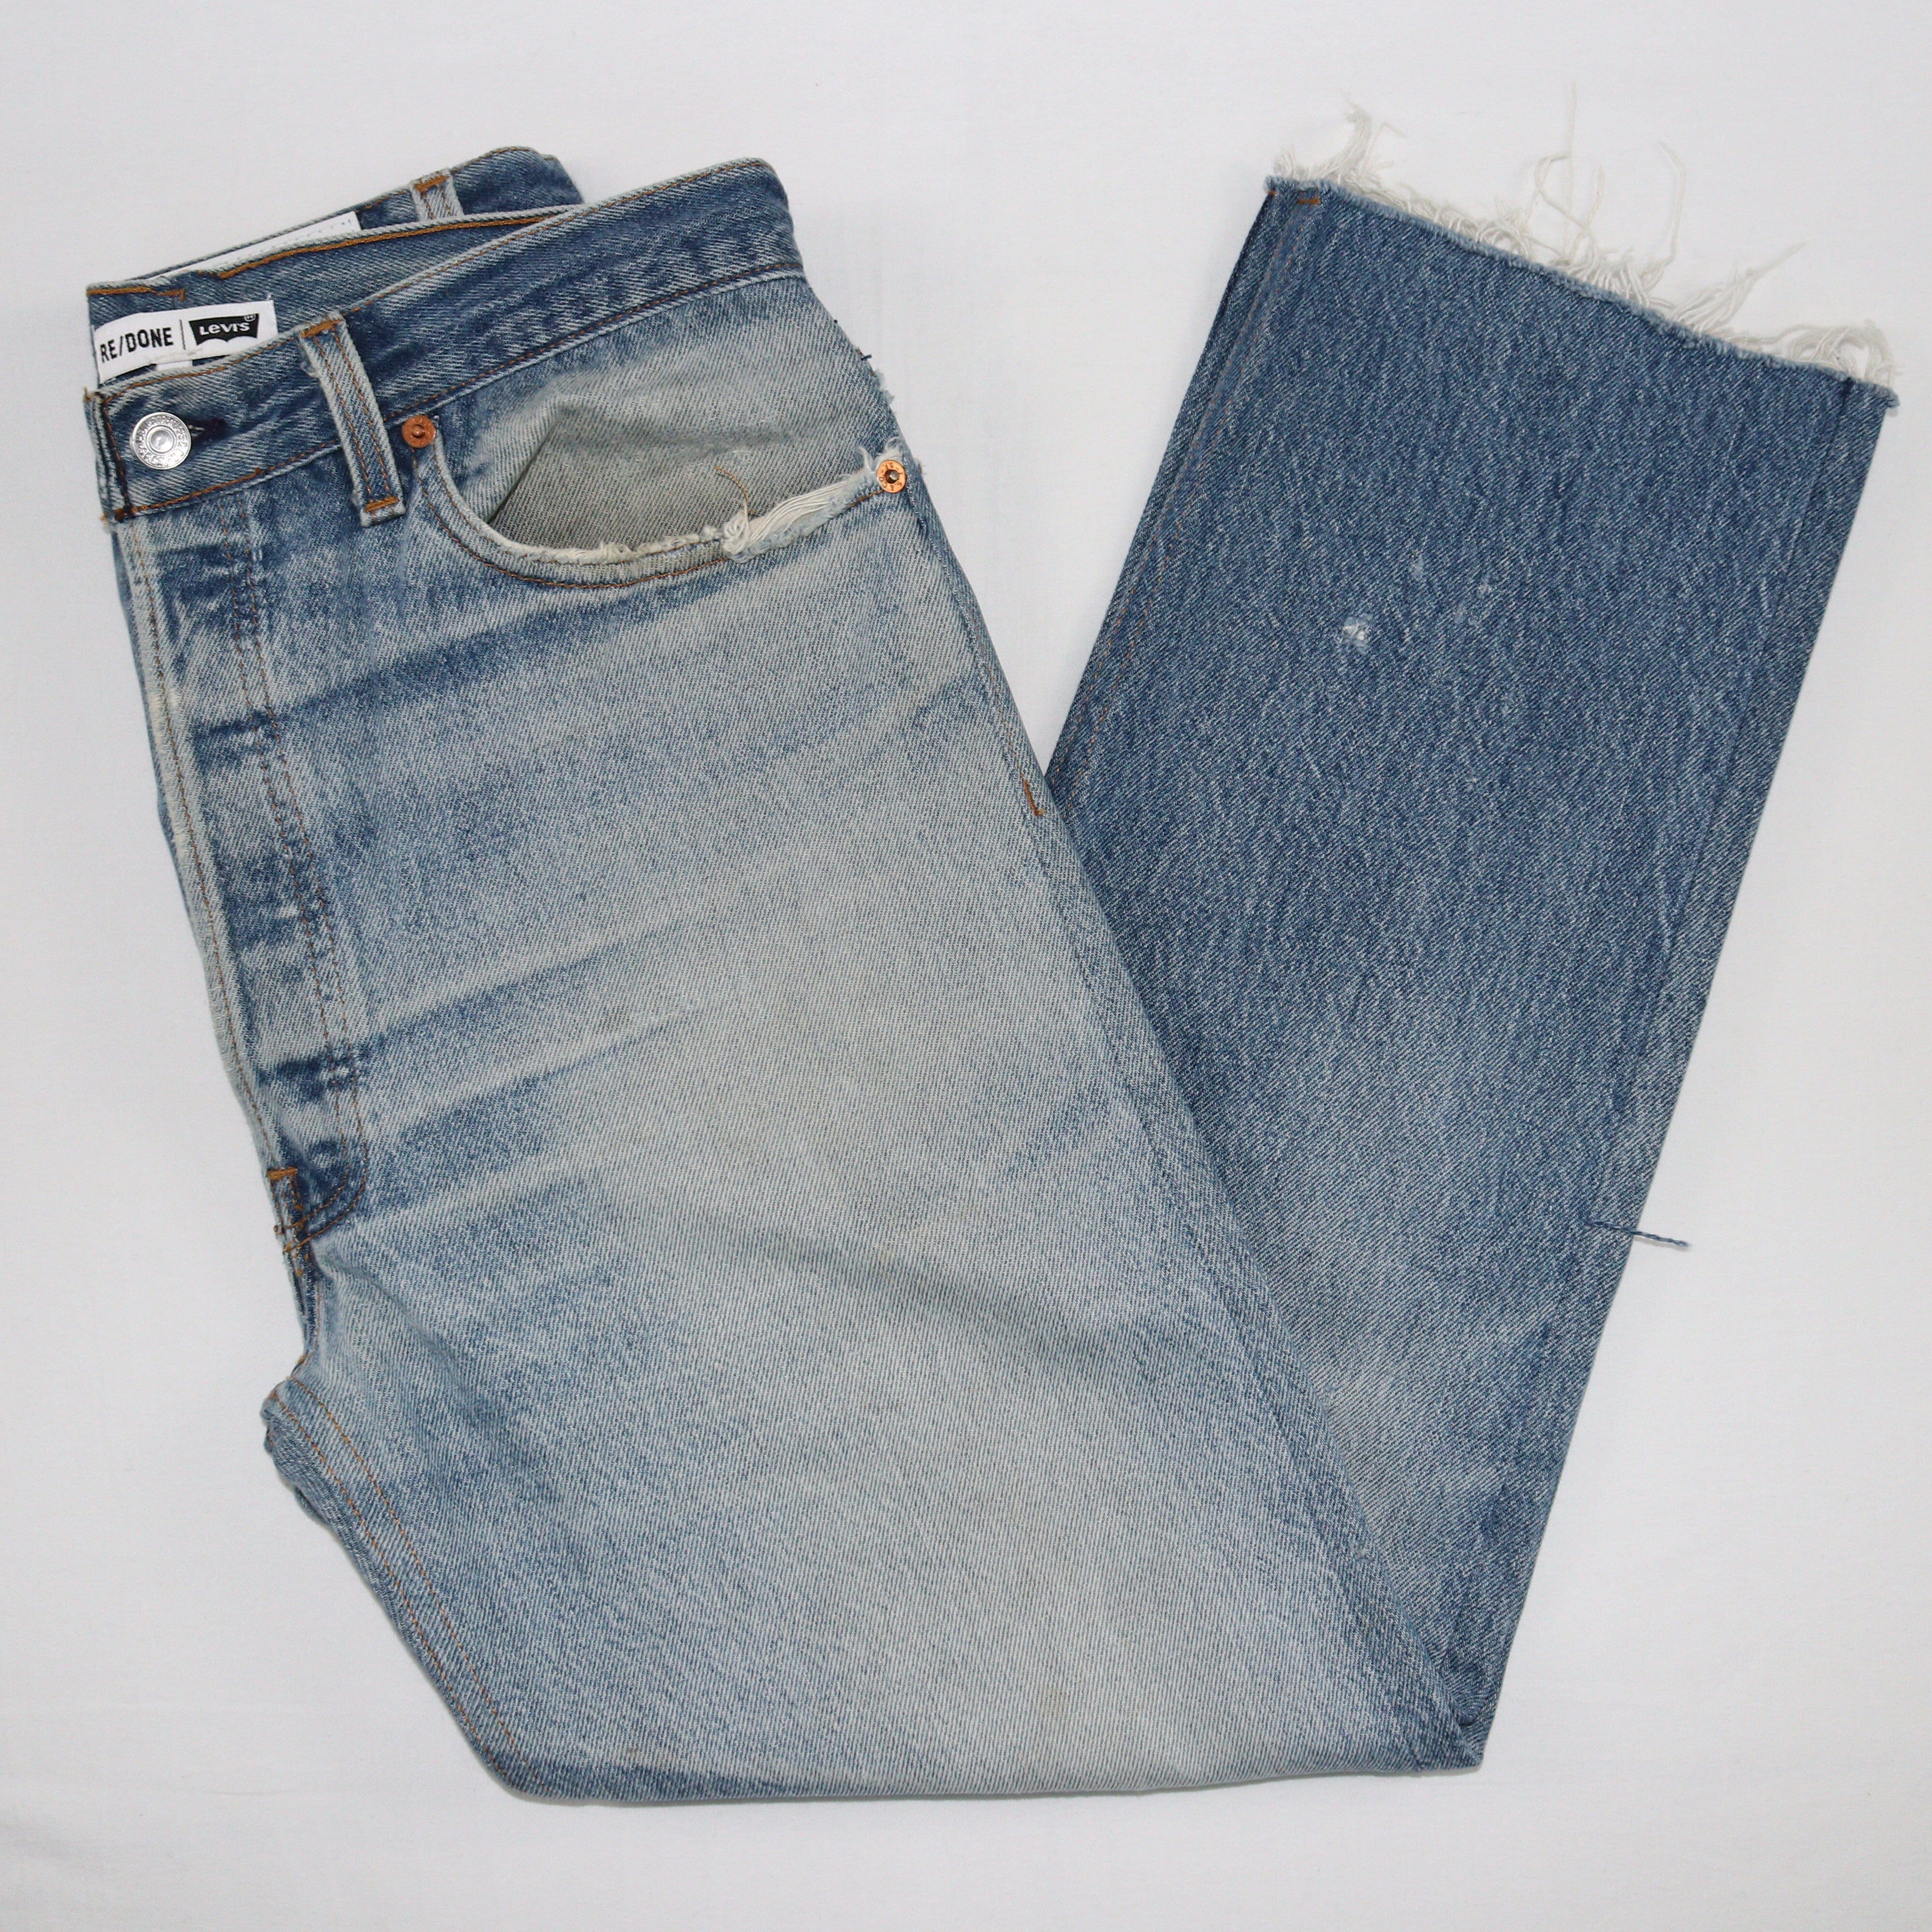 Faded Blue Denim Straight Cut Pants Clothings RE/DONE Levis 